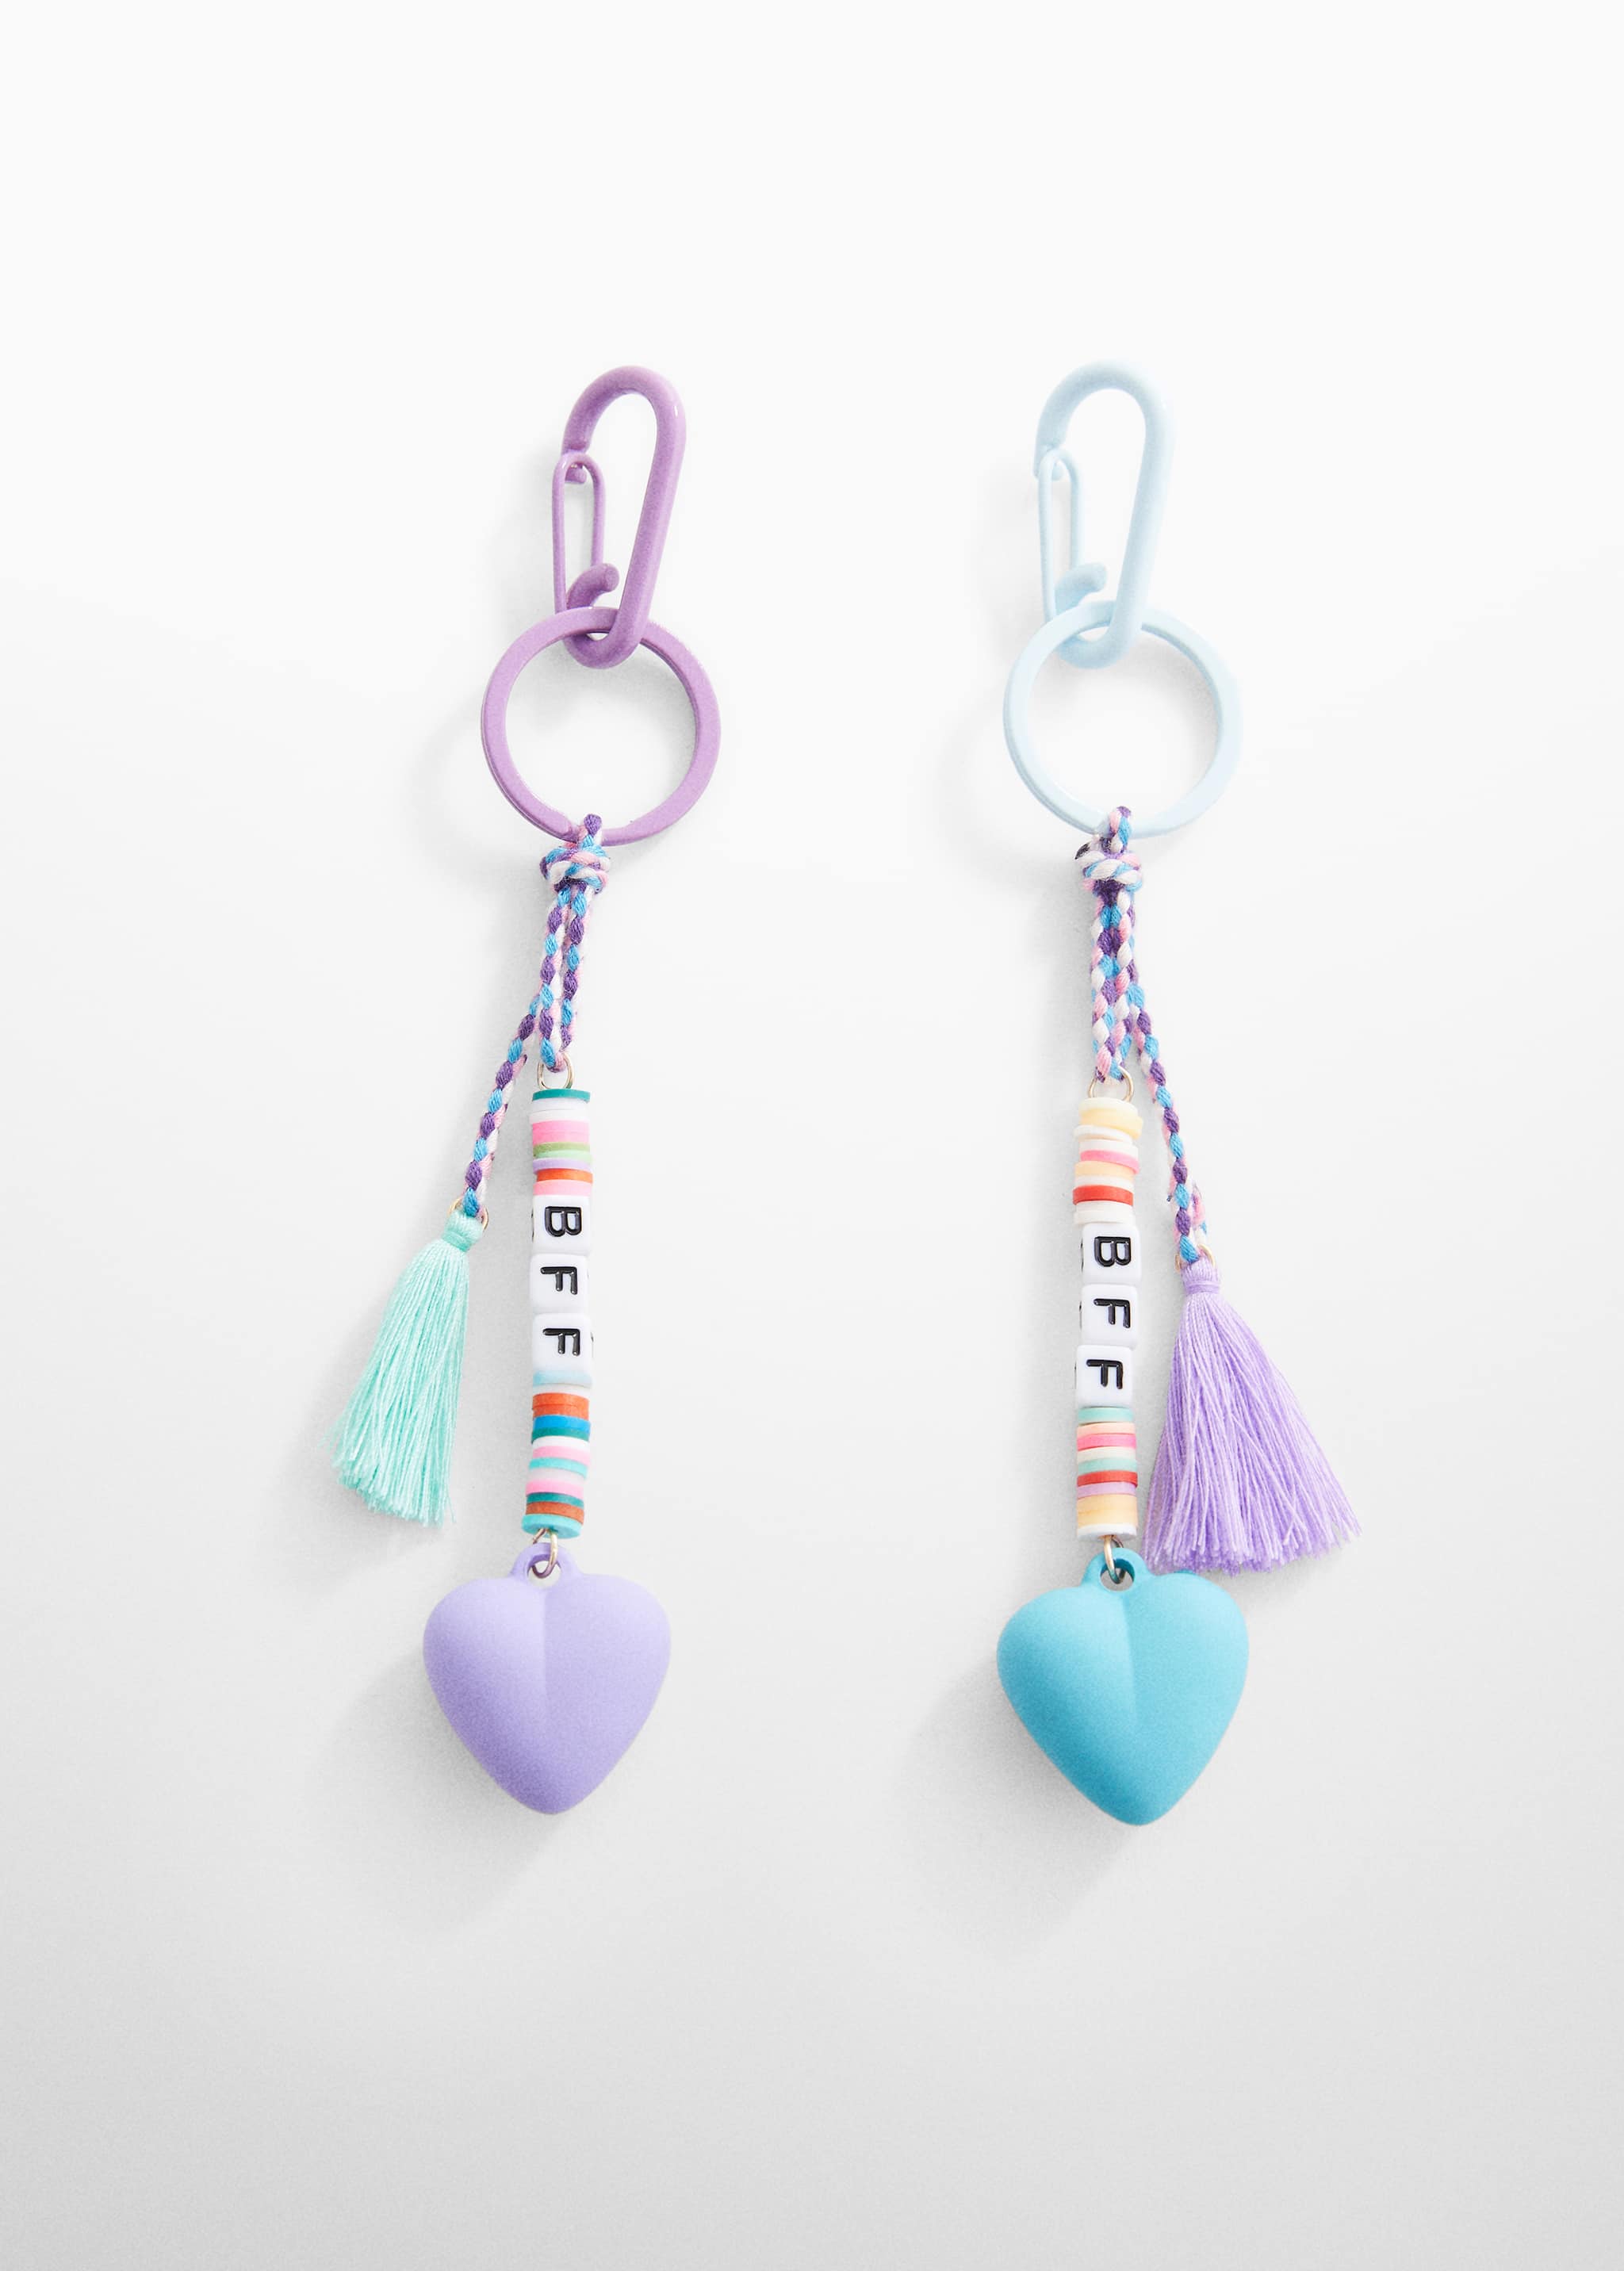 Pack of 2 best friends keychains - Article without model